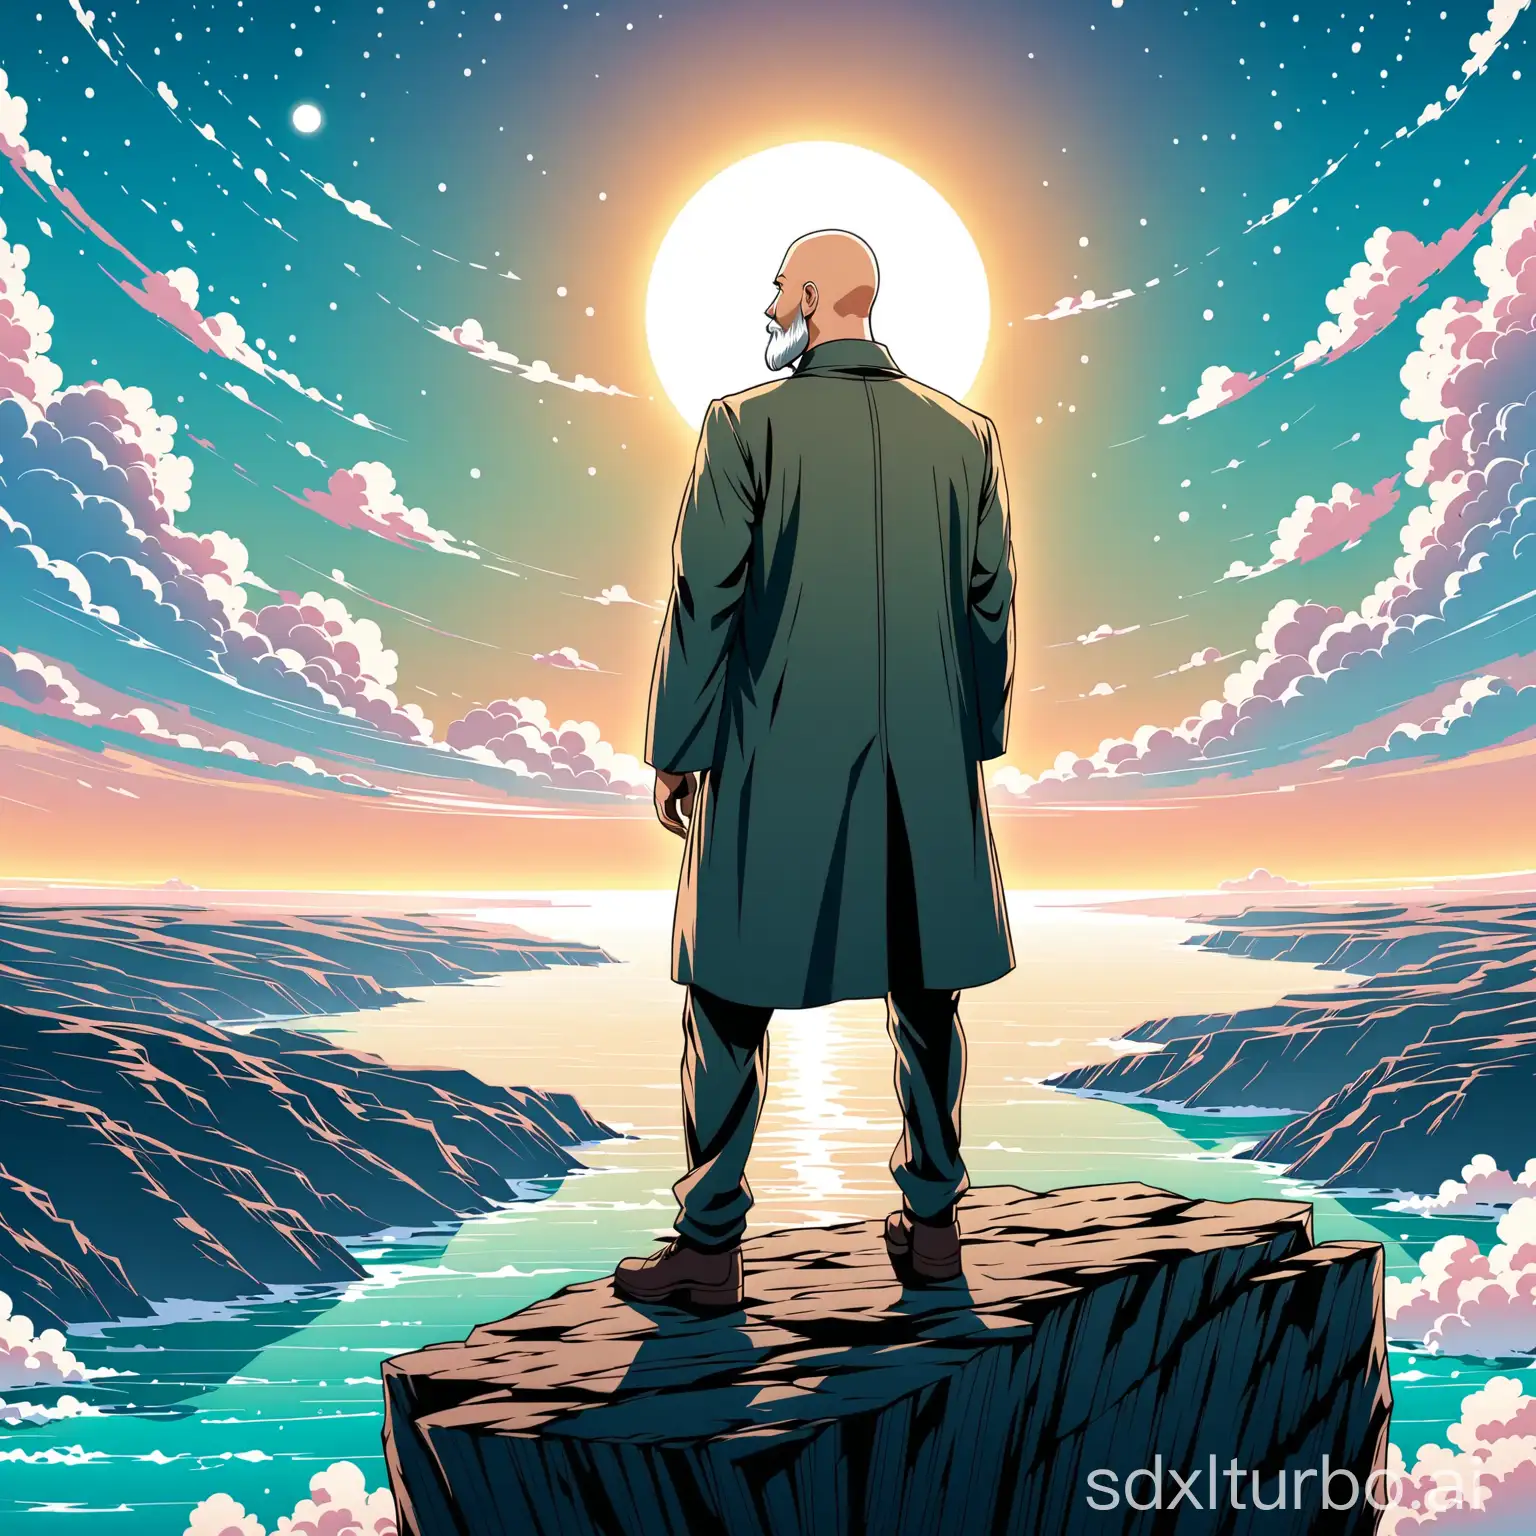 generate a picture of a man with a grey beard and bald. standing on a cliff looking into the sky